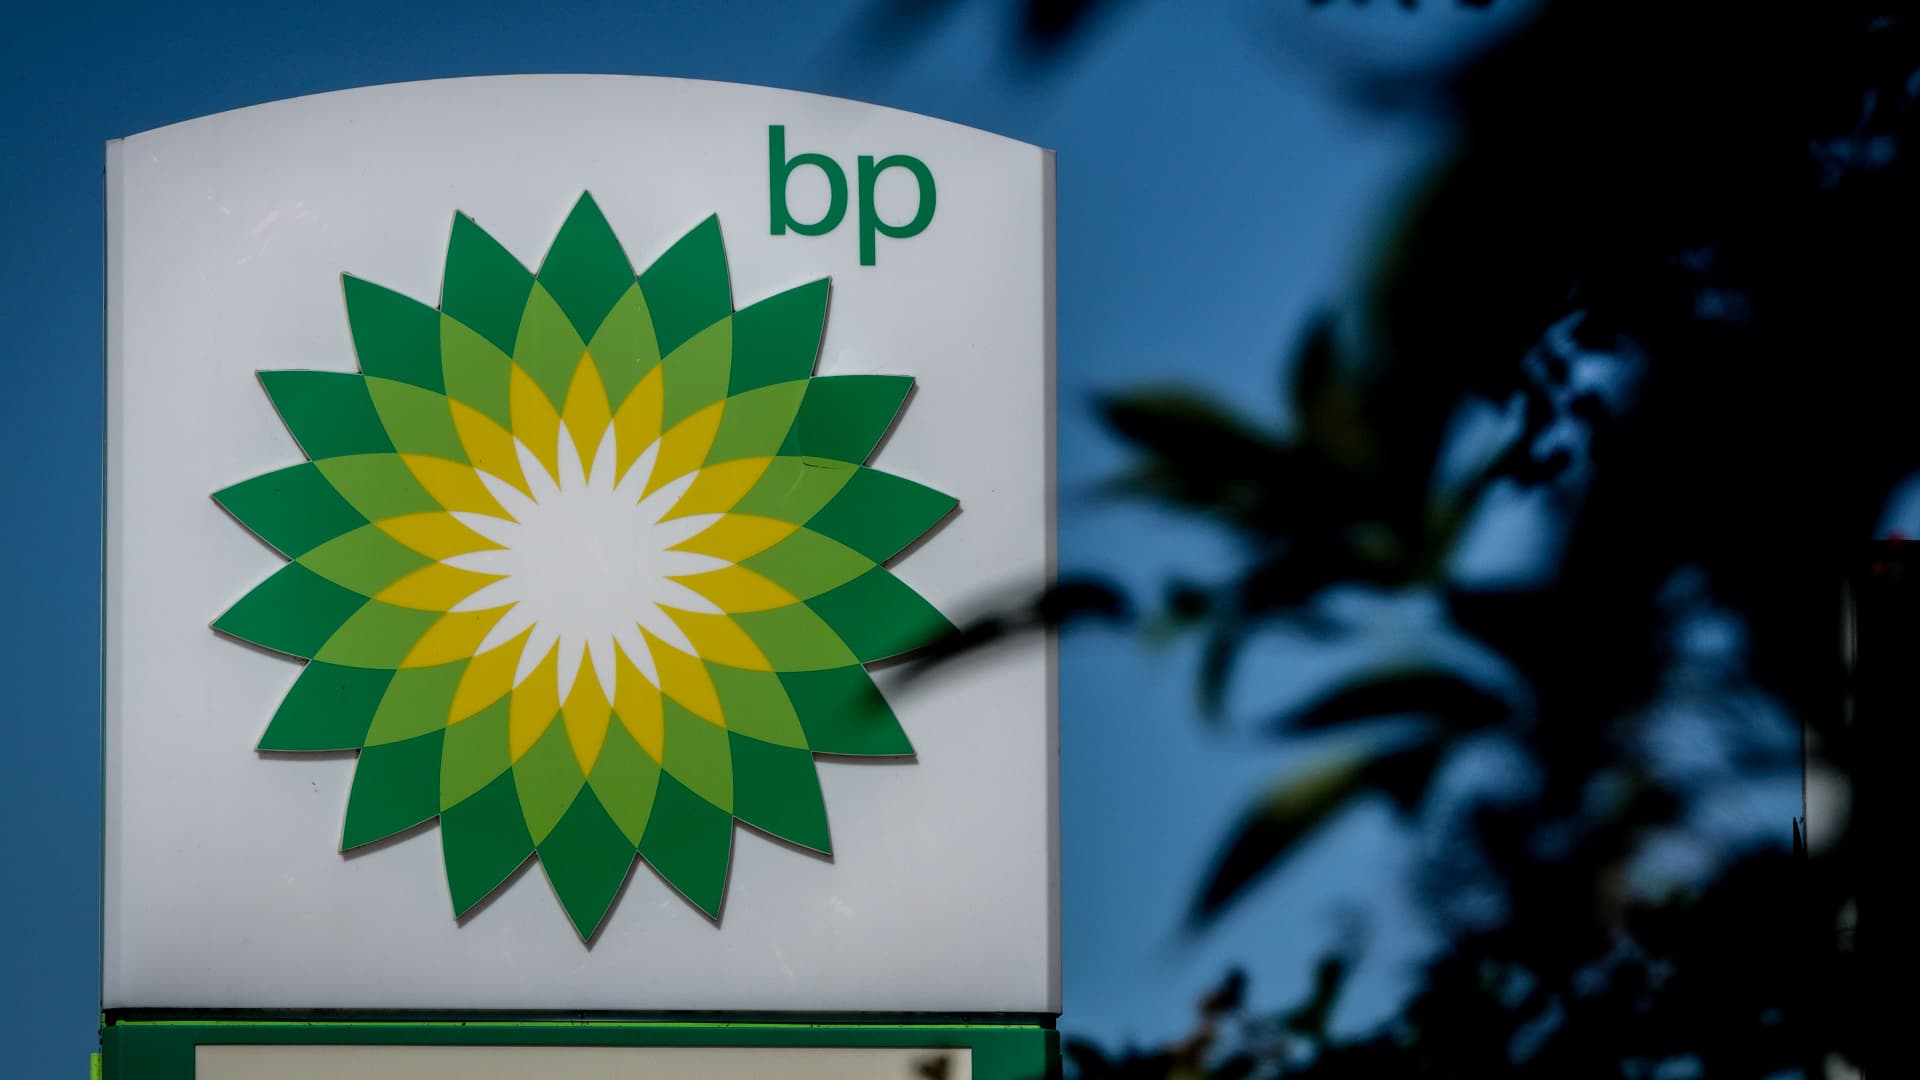 BP invests millions in company that supplies 'rapidly deployable' solar tech